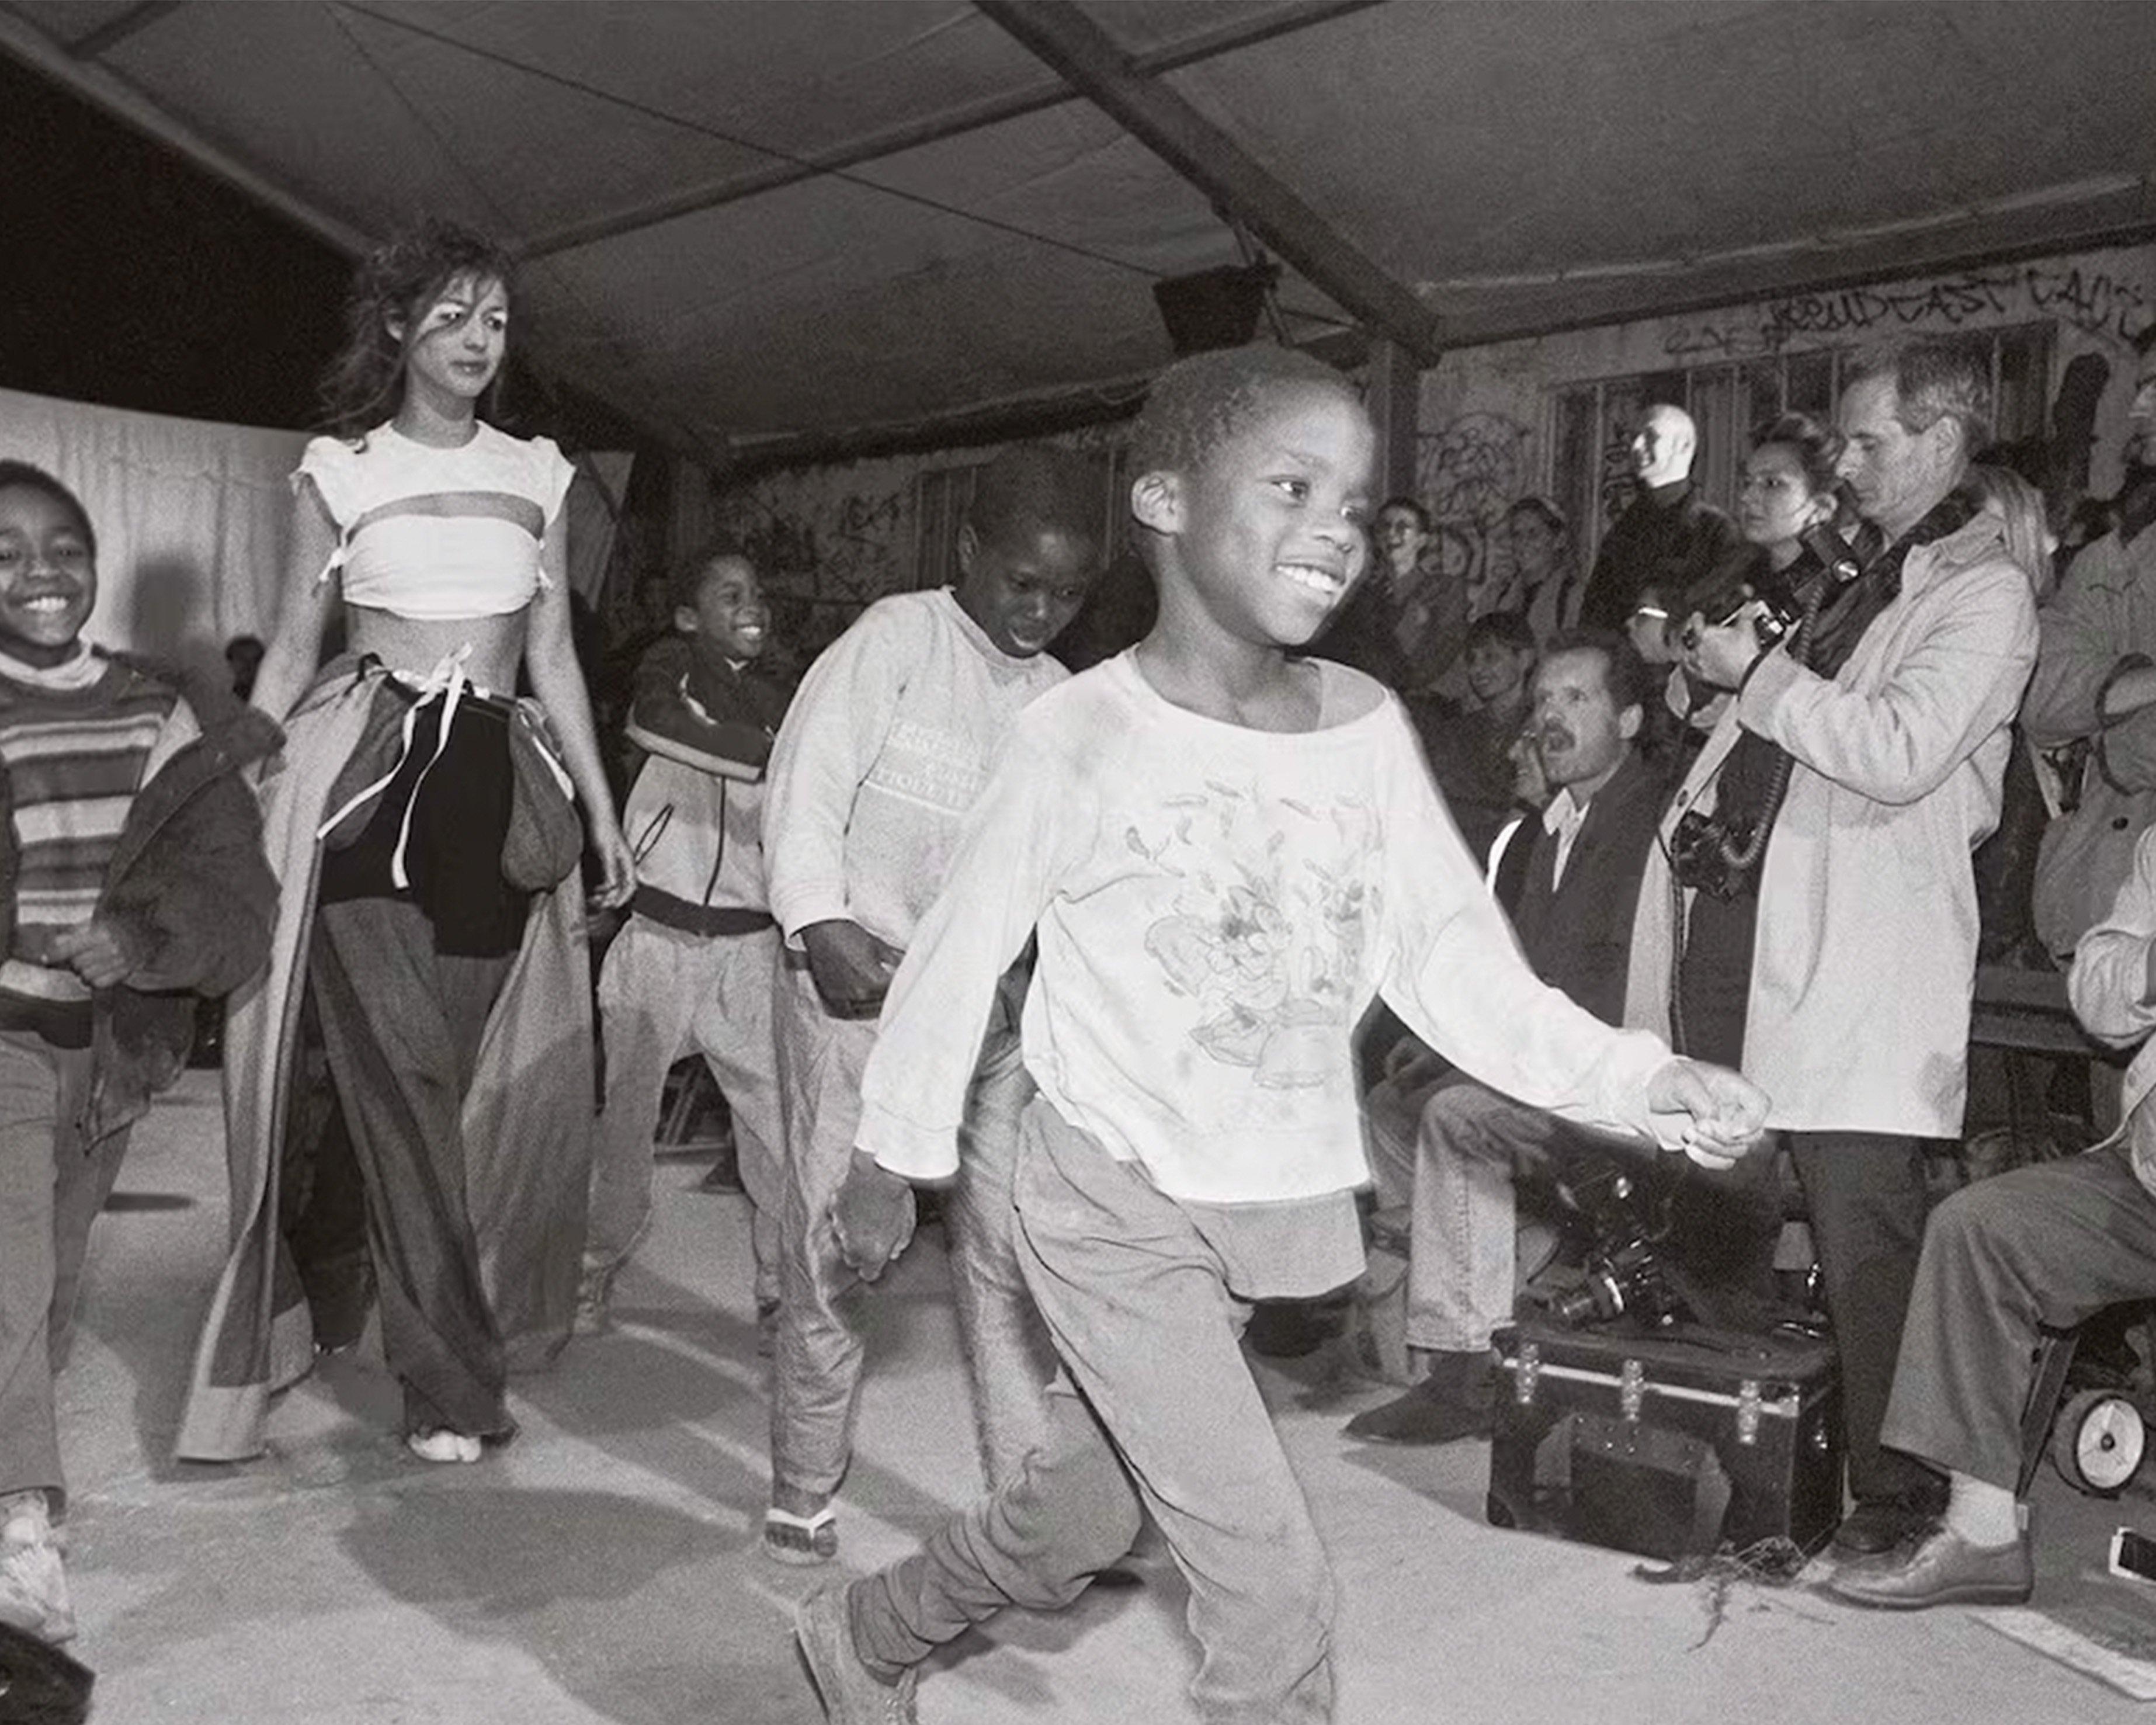 black and white photo of a child running on a fashion runway